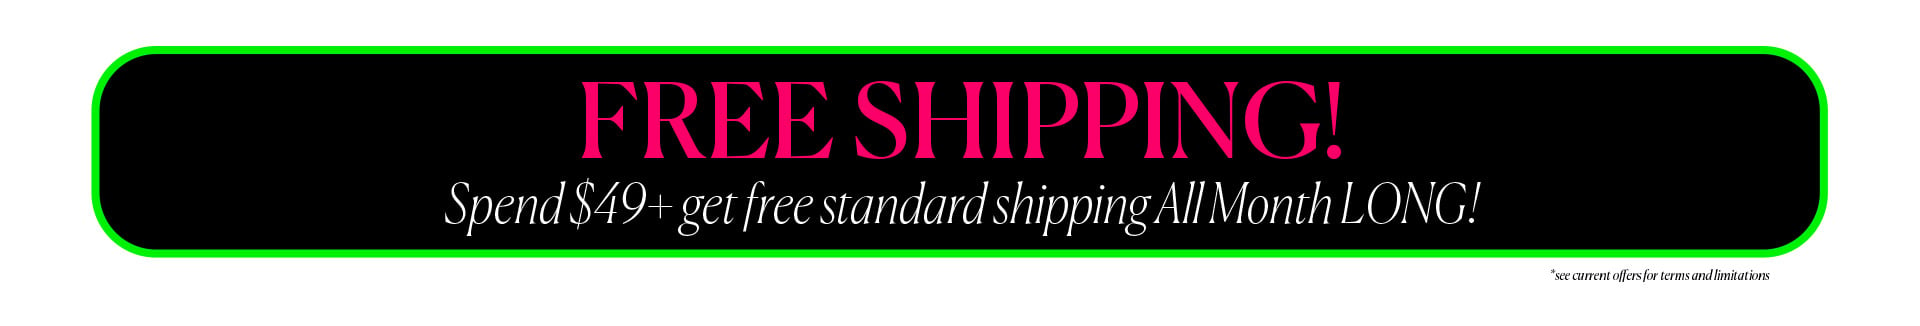 Free Shipping - Spend $49+ and get free standard shipping ALL MONTH LONG!